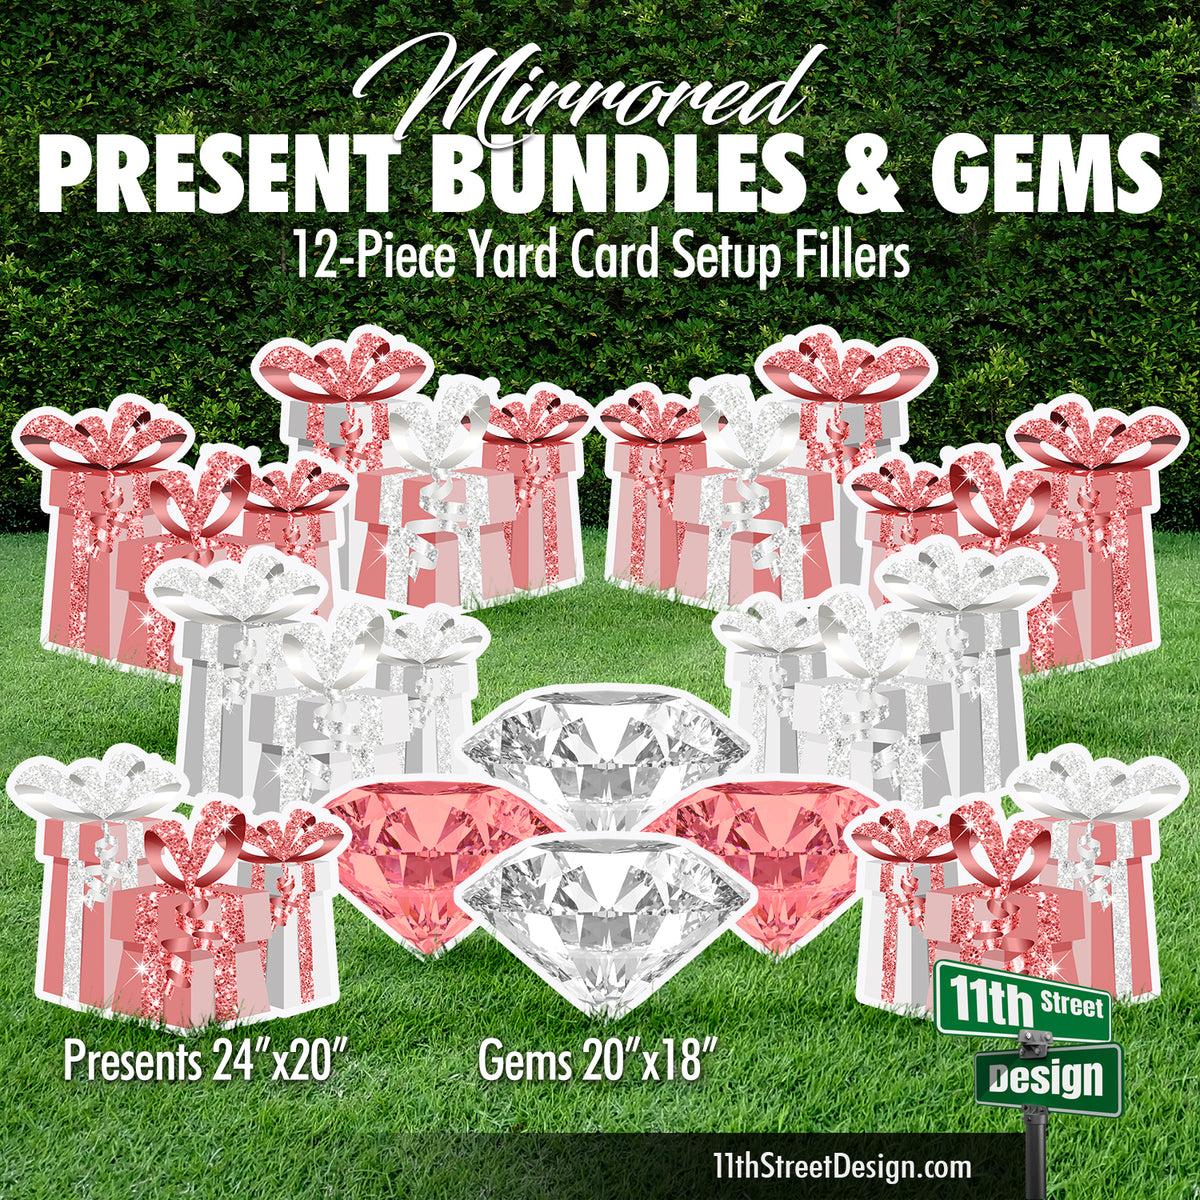 Rose Gold White Present Bundles and Gems - Mirrored Yard Card Setup Fillers